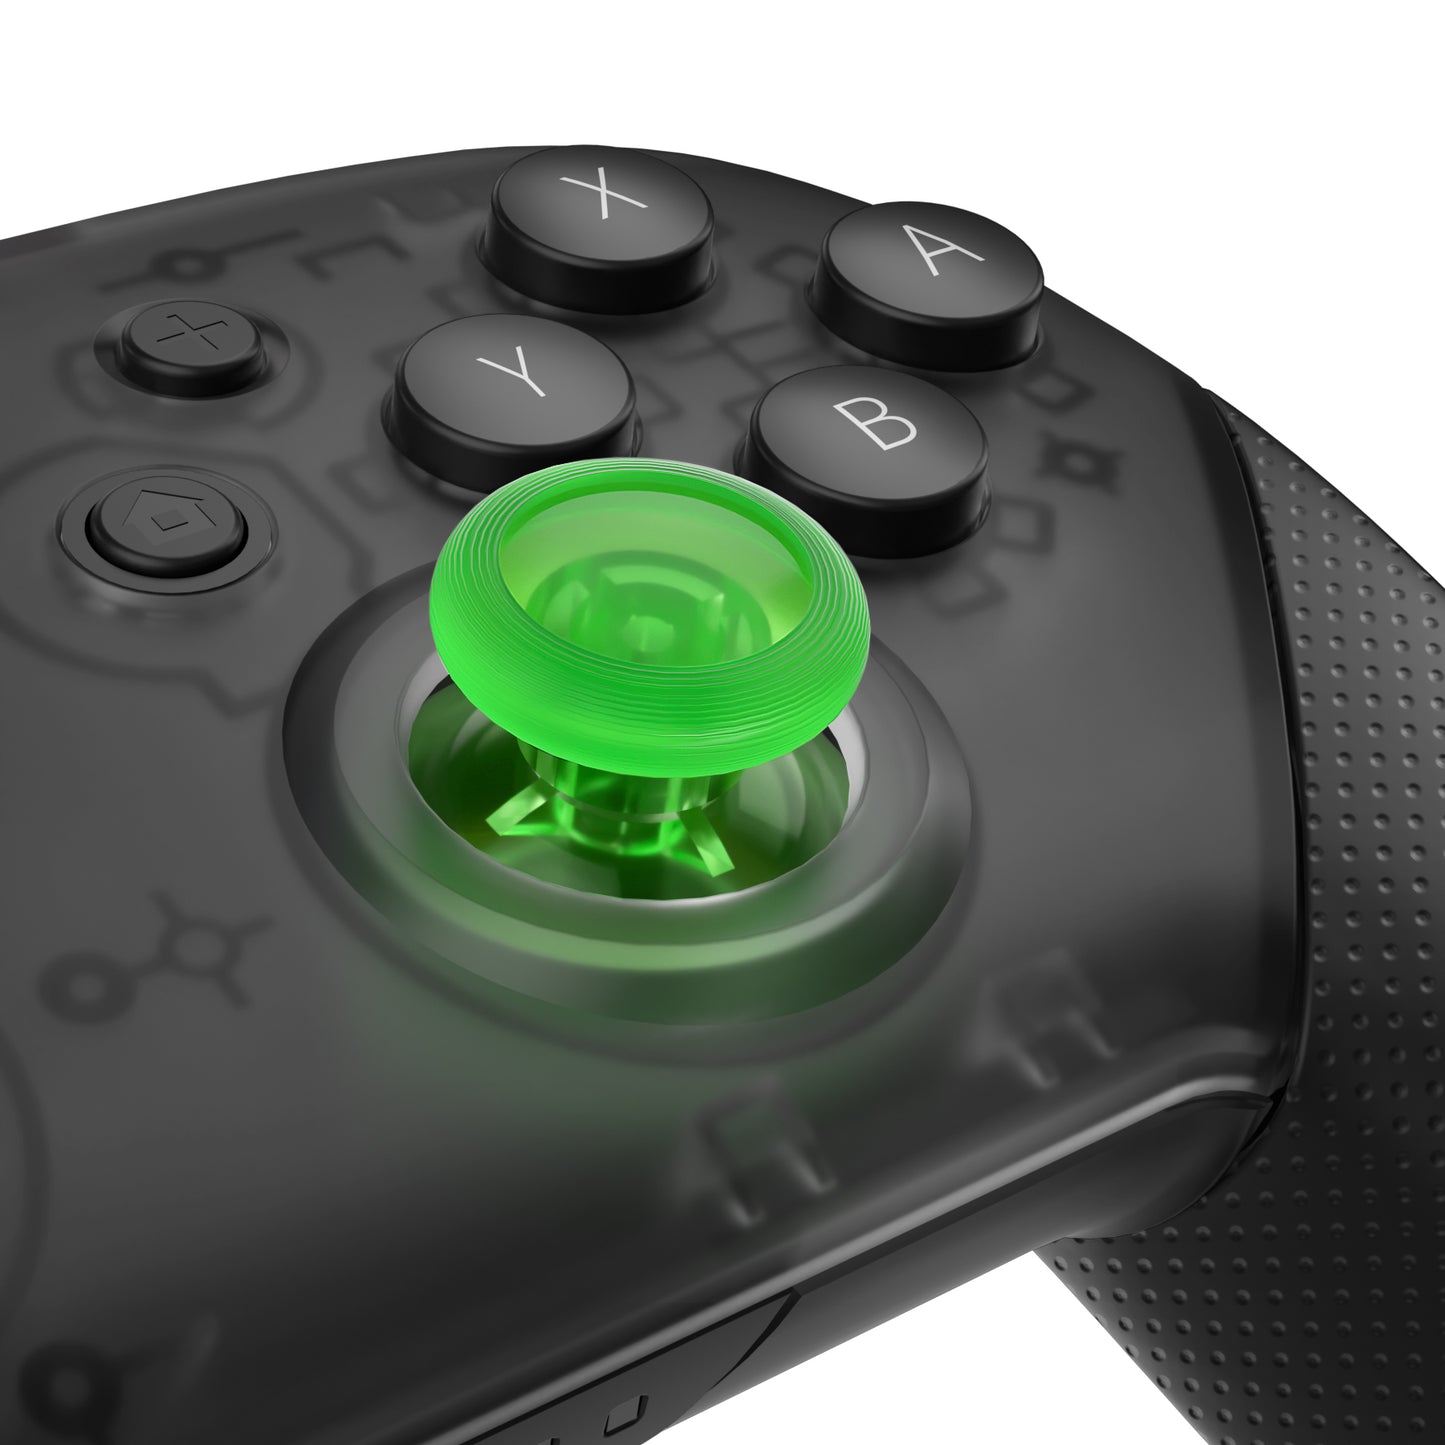 eXtremeRate Replacement 3D Joystick Thumbsticks for Nintendo Switch Pro Controller - Clear Green eXtremeRate